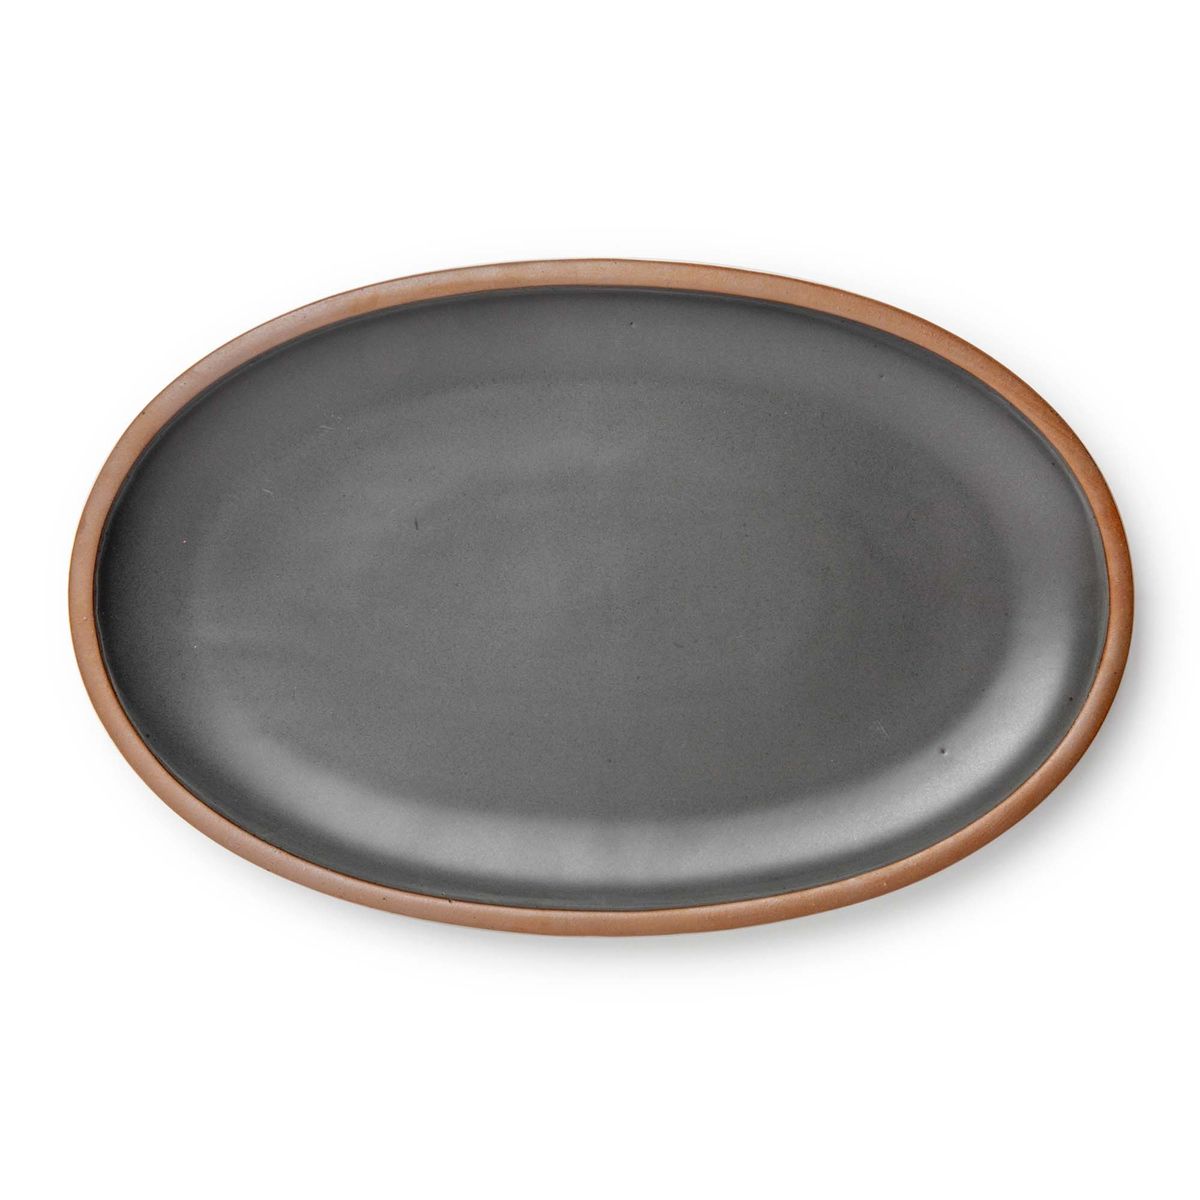 A large oval ceramic platter in a cool, medium grey color featuring iron speckles and an unglazed rim